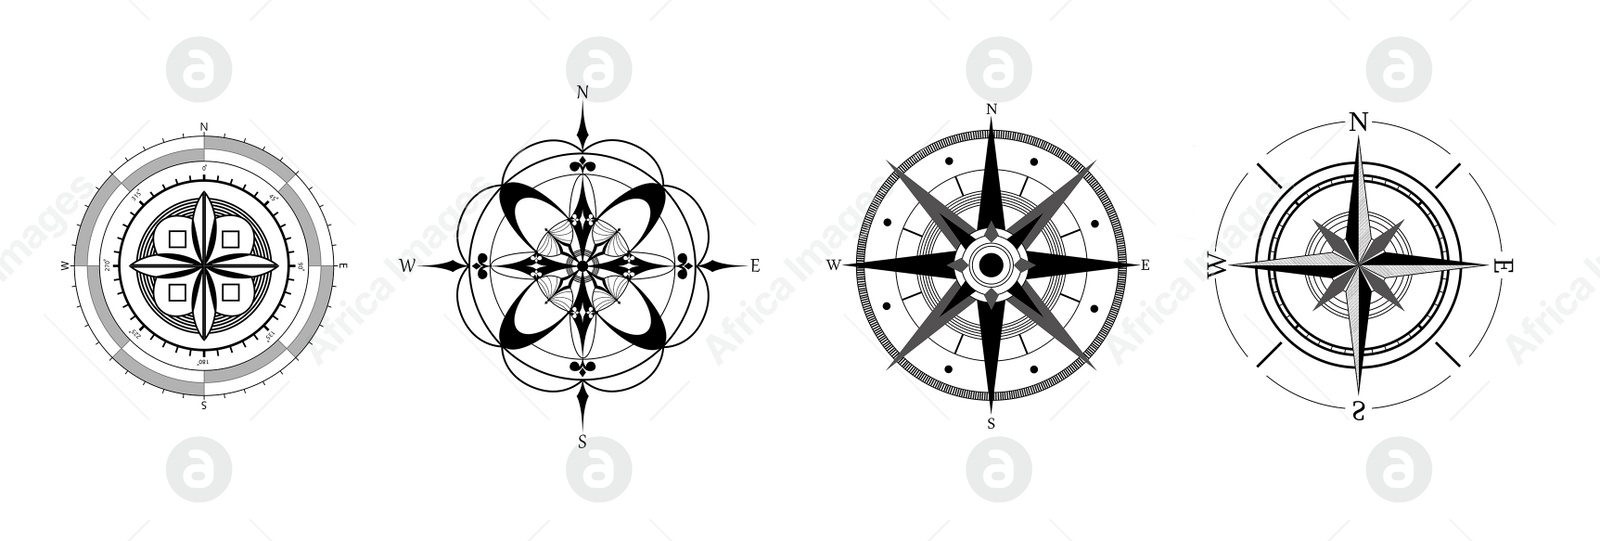 Illustration of Compass roses with four cardinal directions - North, East, South, West on white background, banner design. Illustration